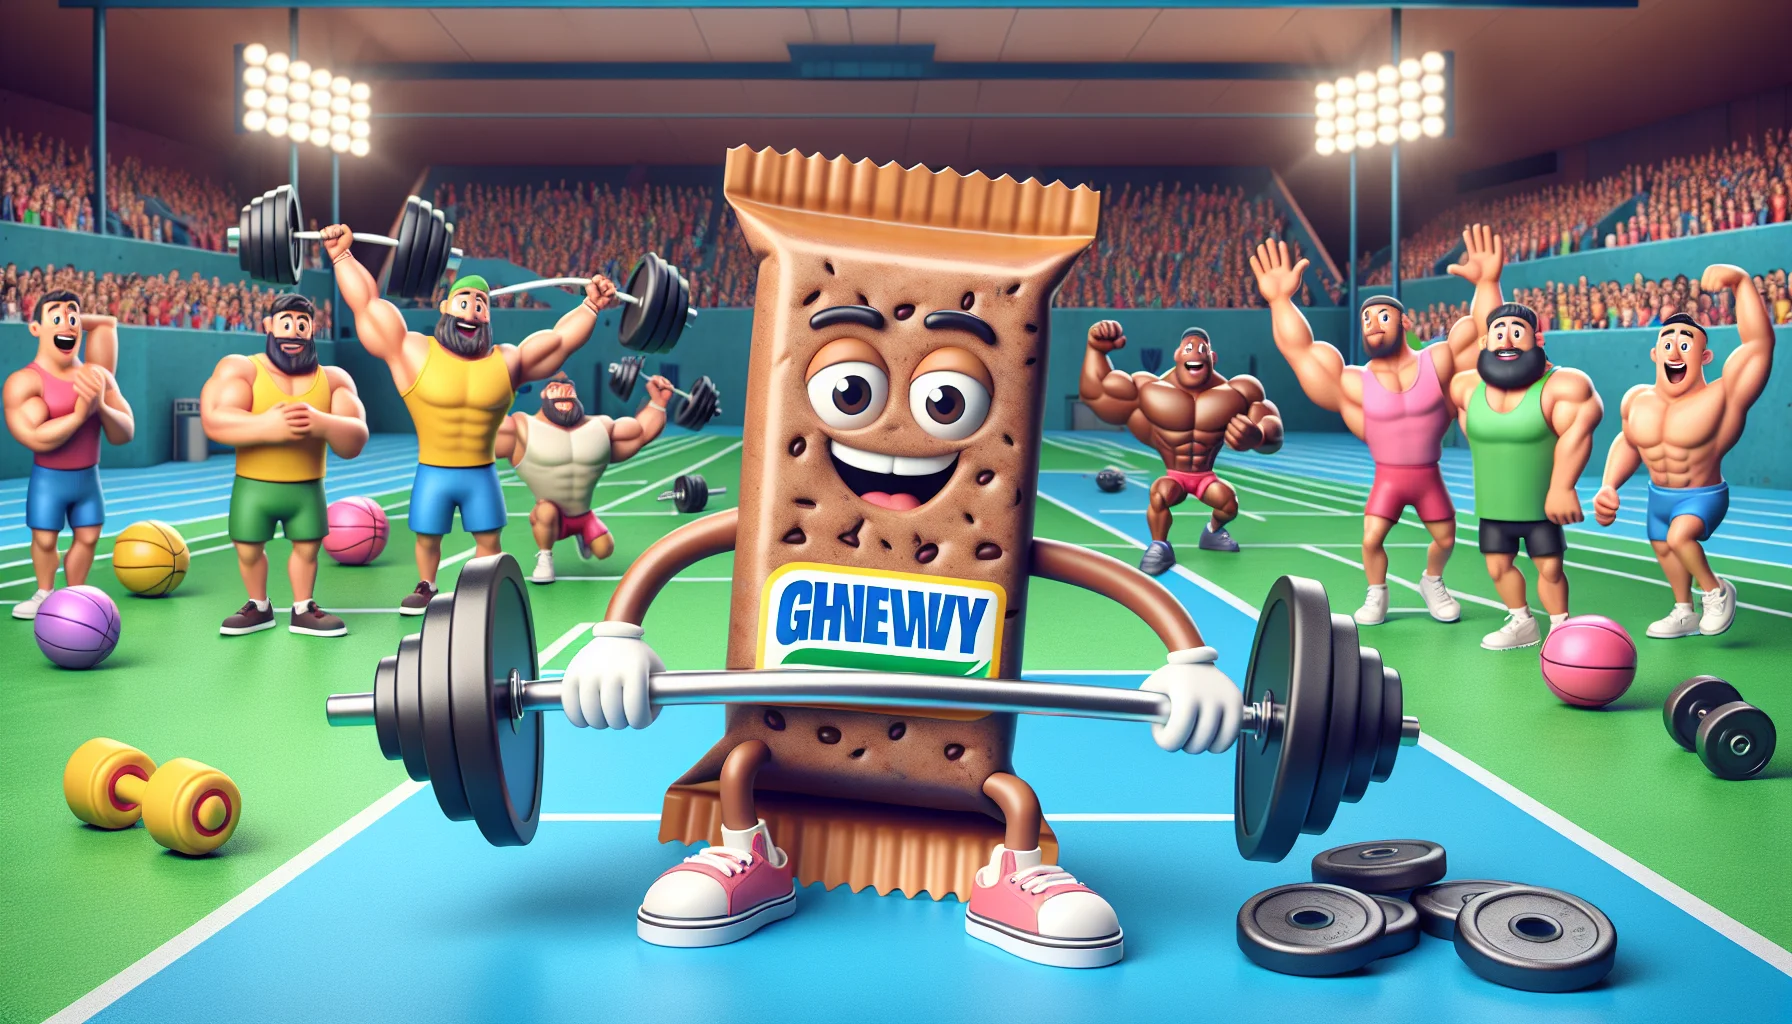 Create a humorous scene showcasing generic chewy protein bars in a scenario that promotes the use of nutritional supplements for sports. The protein bars could be depicted as cartoon-like characters with smiling faces, lifting weights or engaged in some sport-like activities (such as running or cycling), showing off their 'strength'. The setting could be a vibrant sports field, gym or a running track filled with exciting sports actions. Various onlookers could be shown with wide-eyed expressions and speech bubbles expressing their amazement towards the athletic prowess of these protein bars.